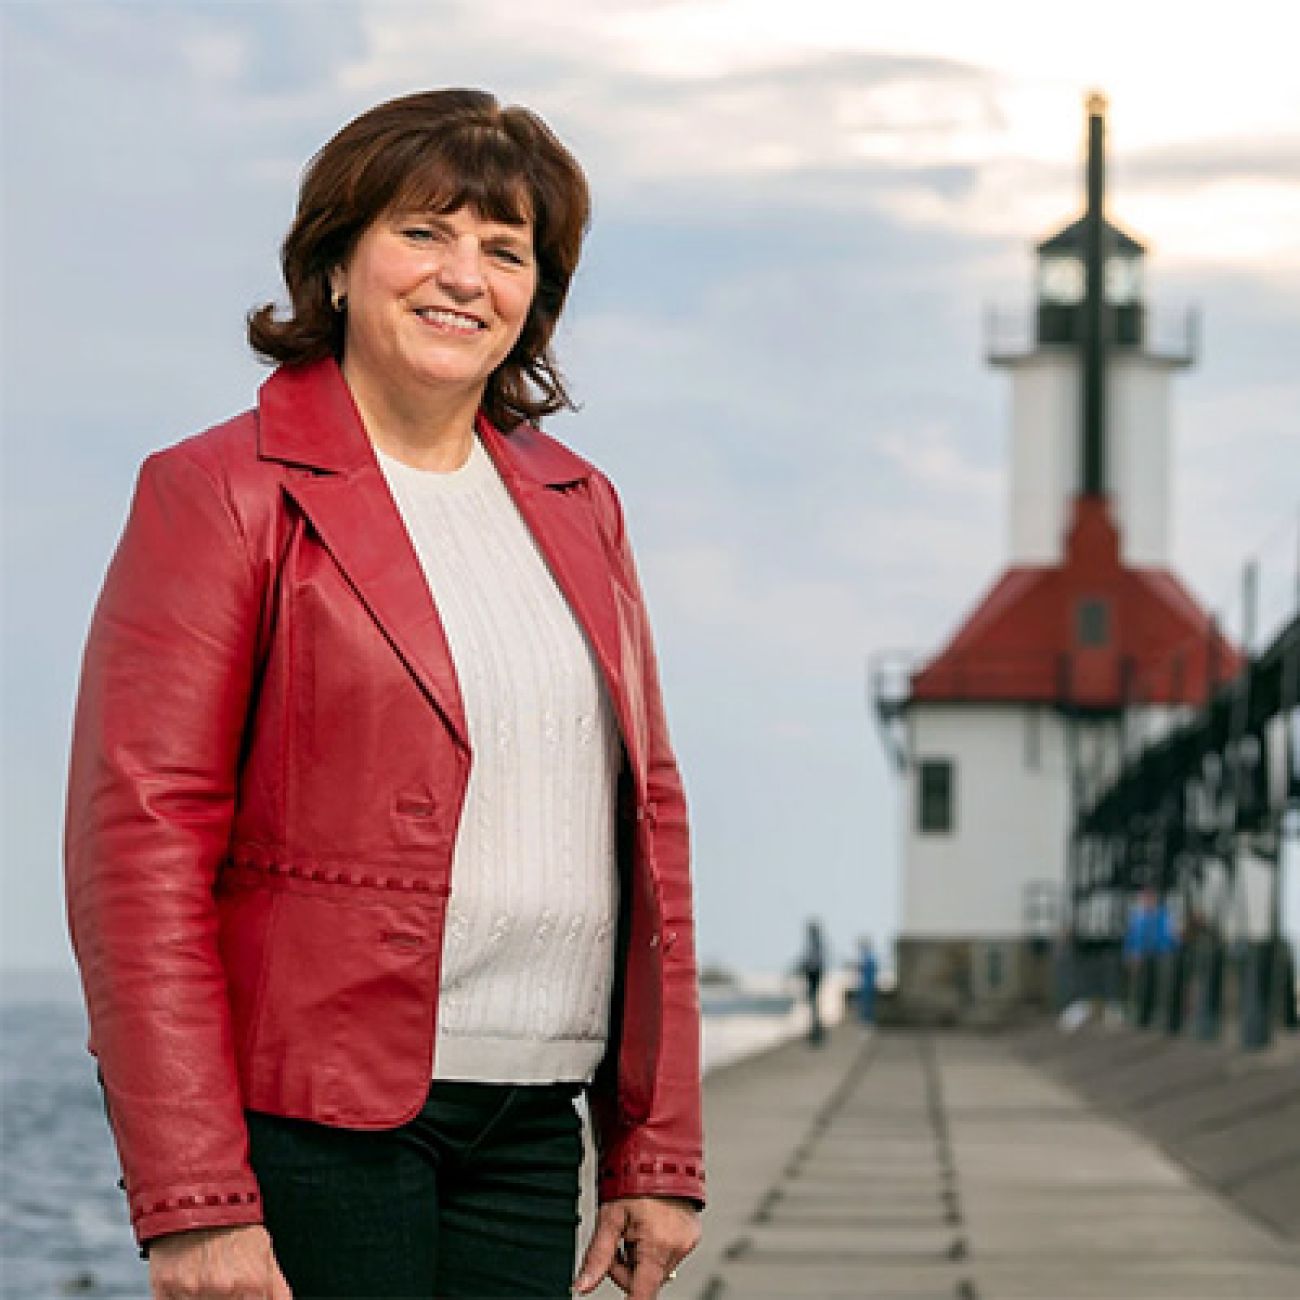 Sherry O’Donnell, wearing a red jacket, stands in front of a lighthouse